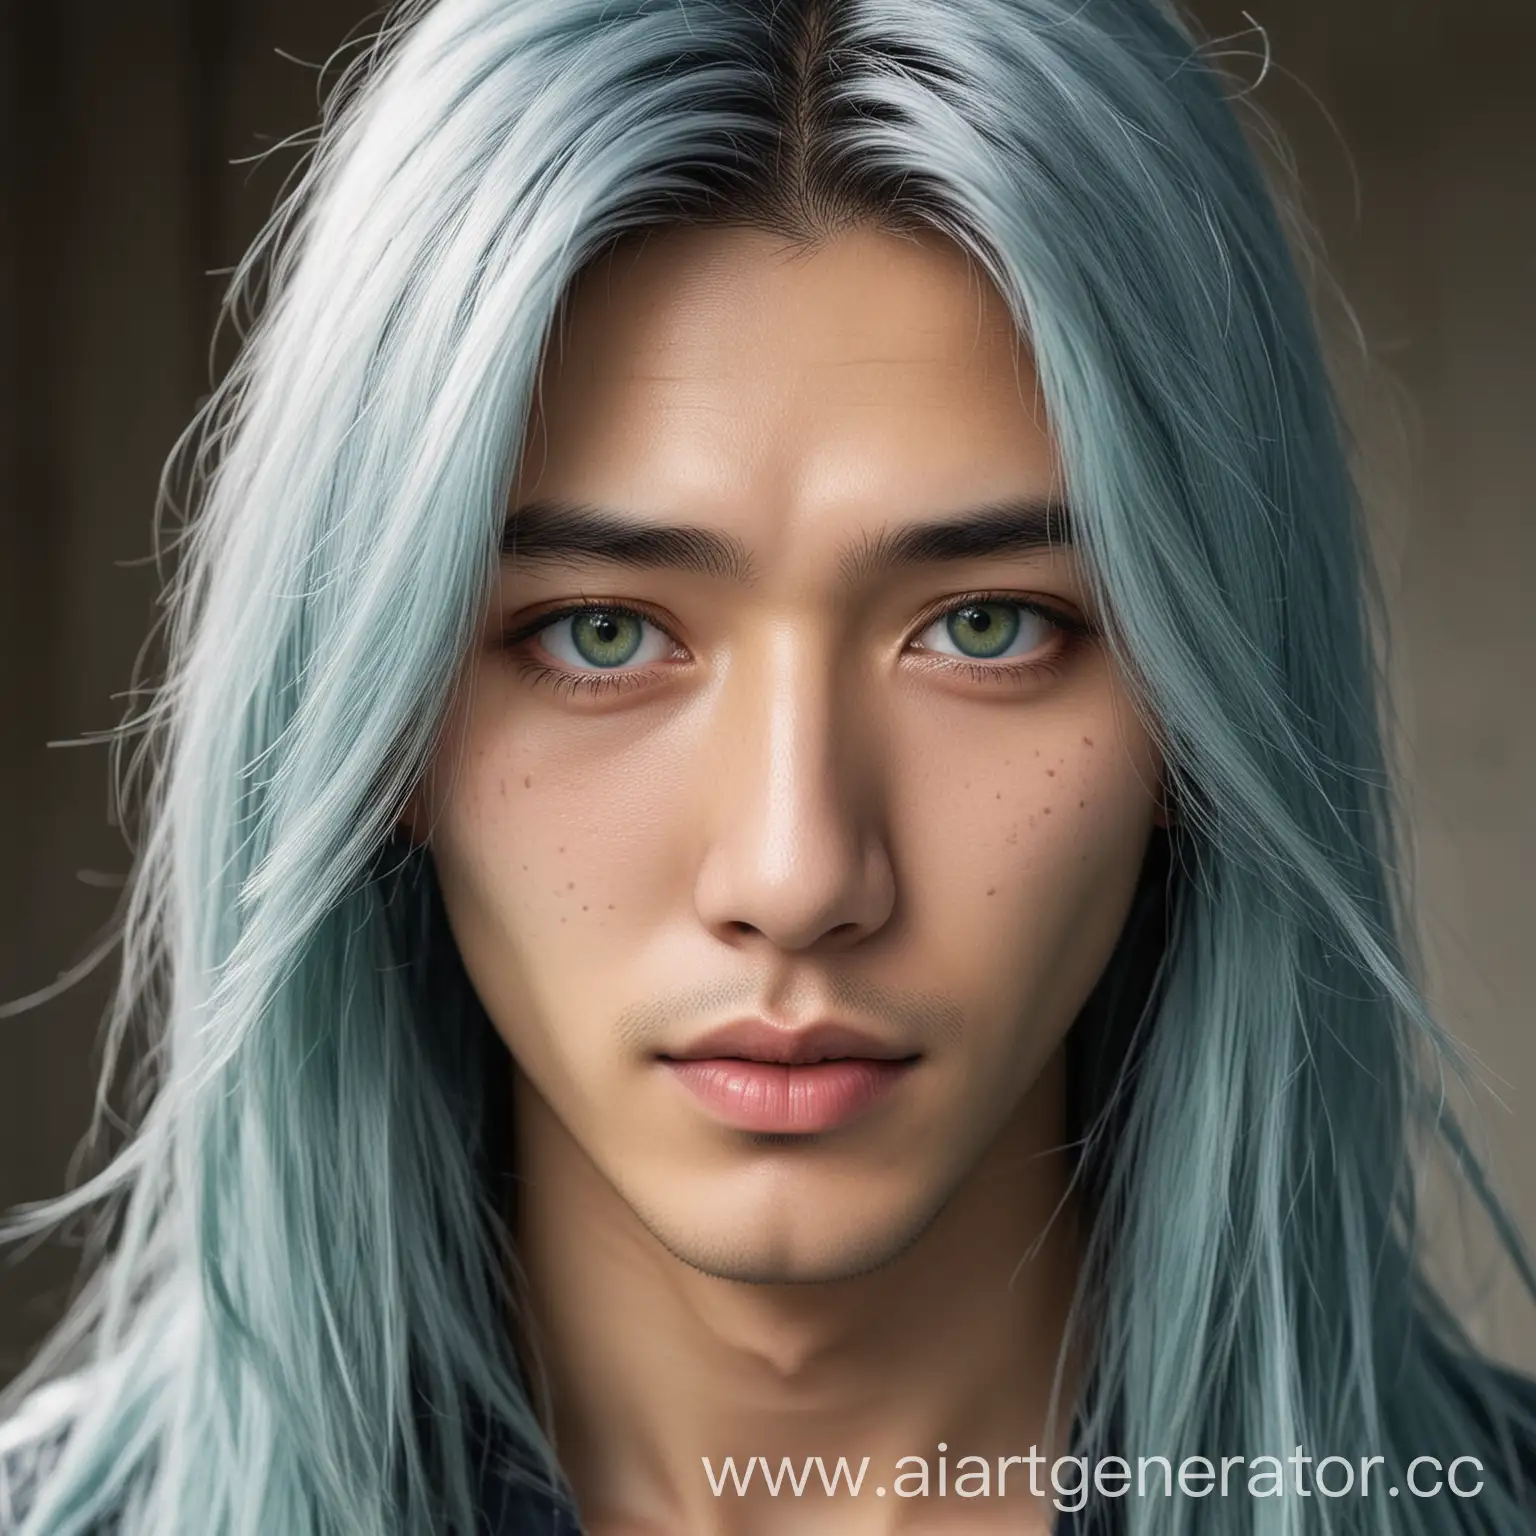 Realistic-Portrait-of-a-Handsome-Asian-with-Long-Blue-Hair-and-Fair-Skin